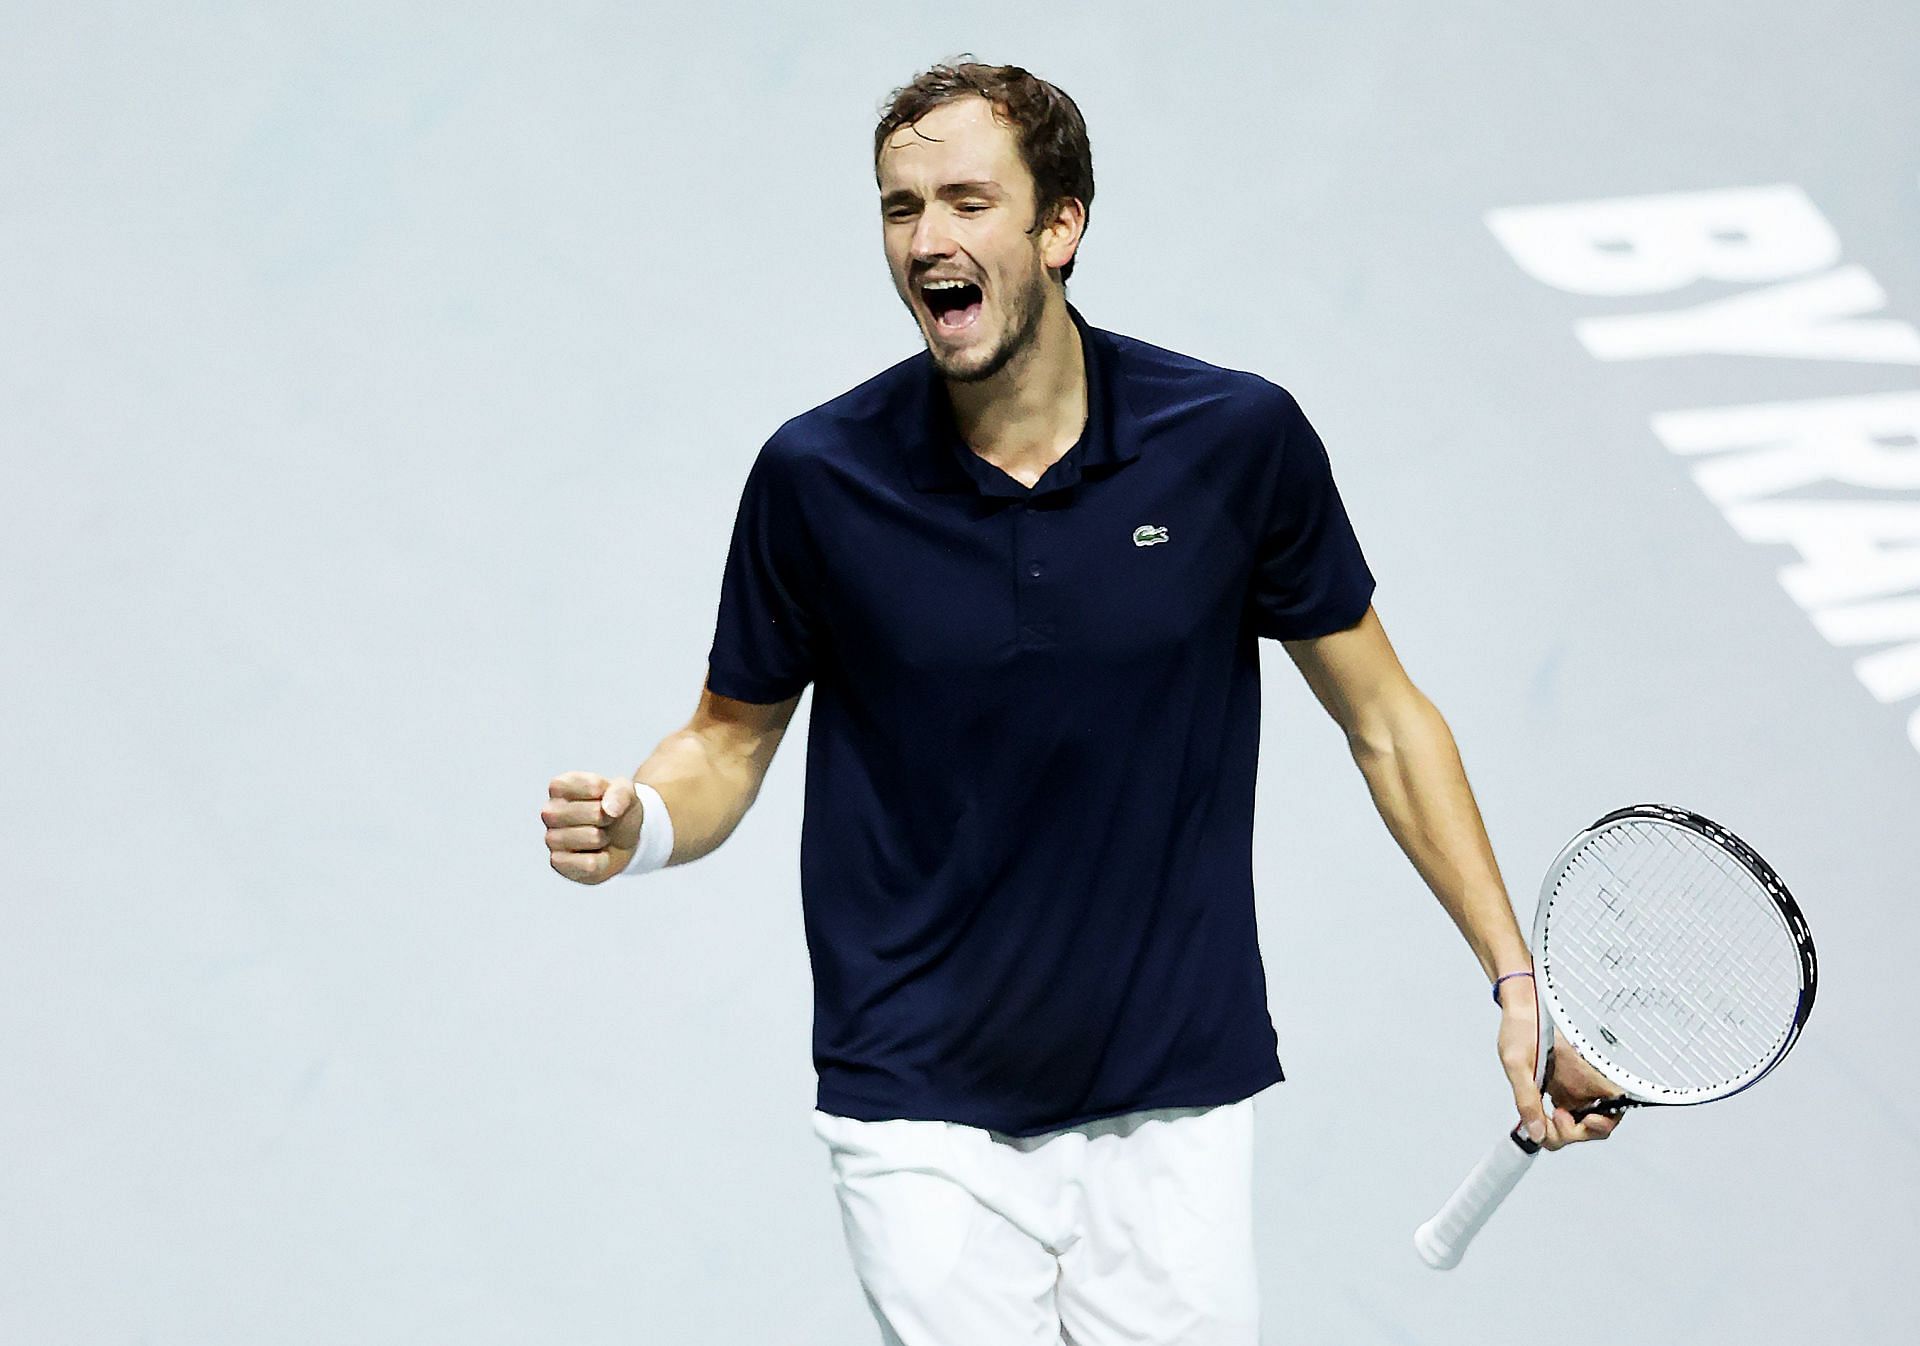 Daniil Medvedev exults during the Davis Cup Final 2021 between Russian Tennis Federation and Croatia